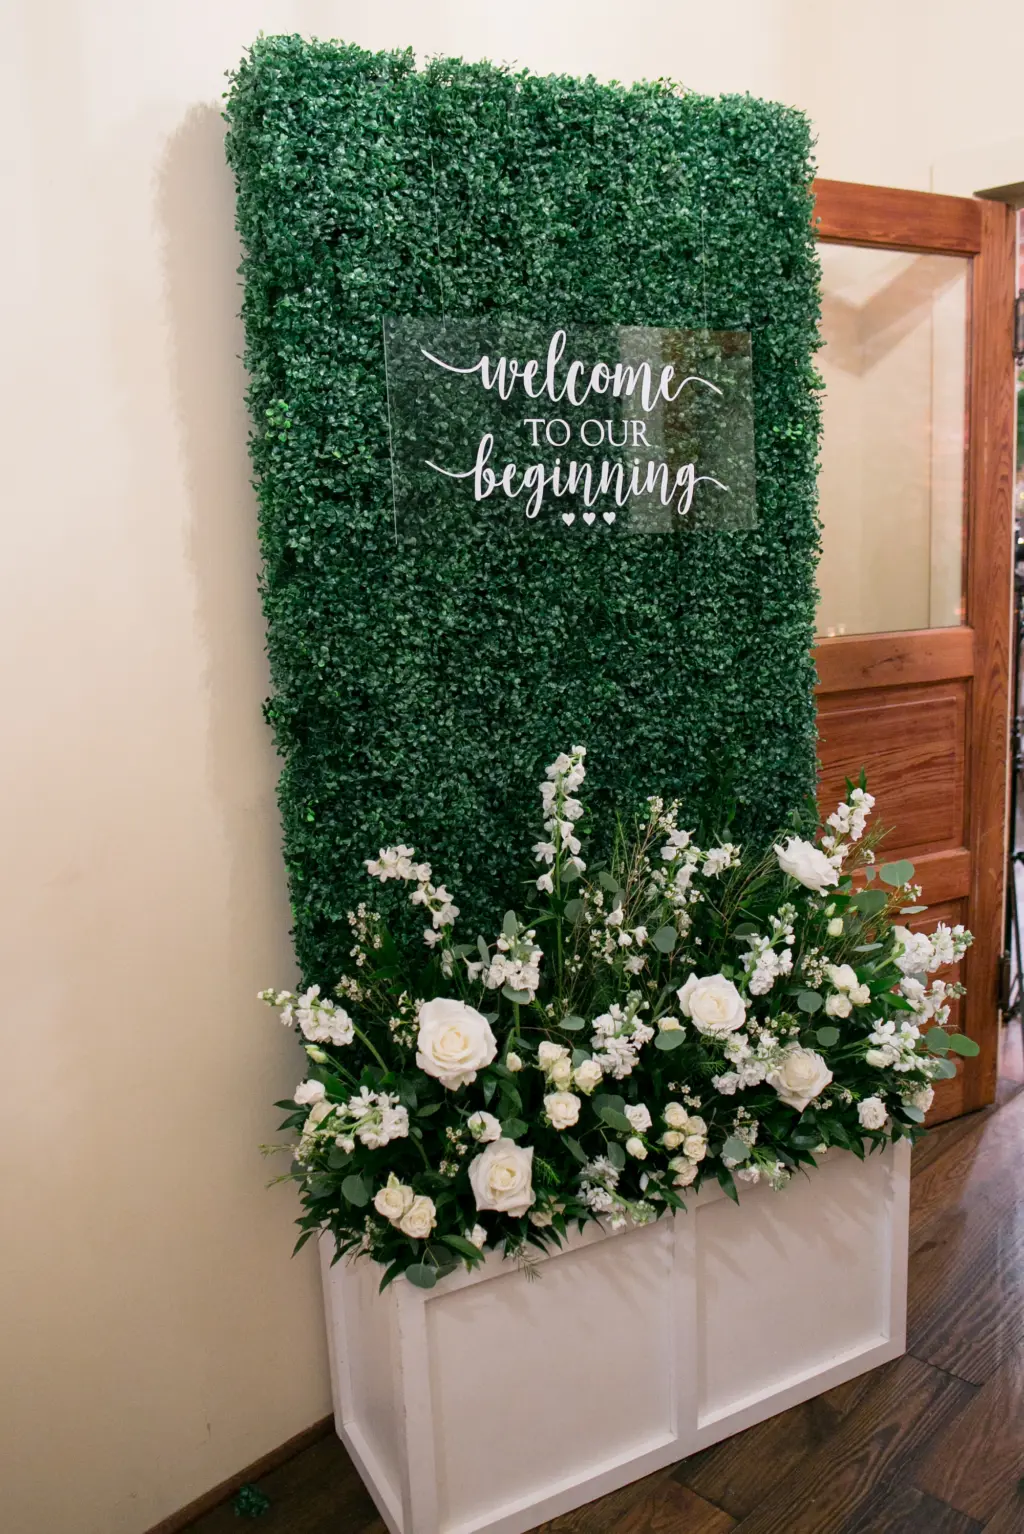 Hedge Gall with Acrylic Welcome to Our Beginning Sign | Modern Wedding Reception Decor Ideas